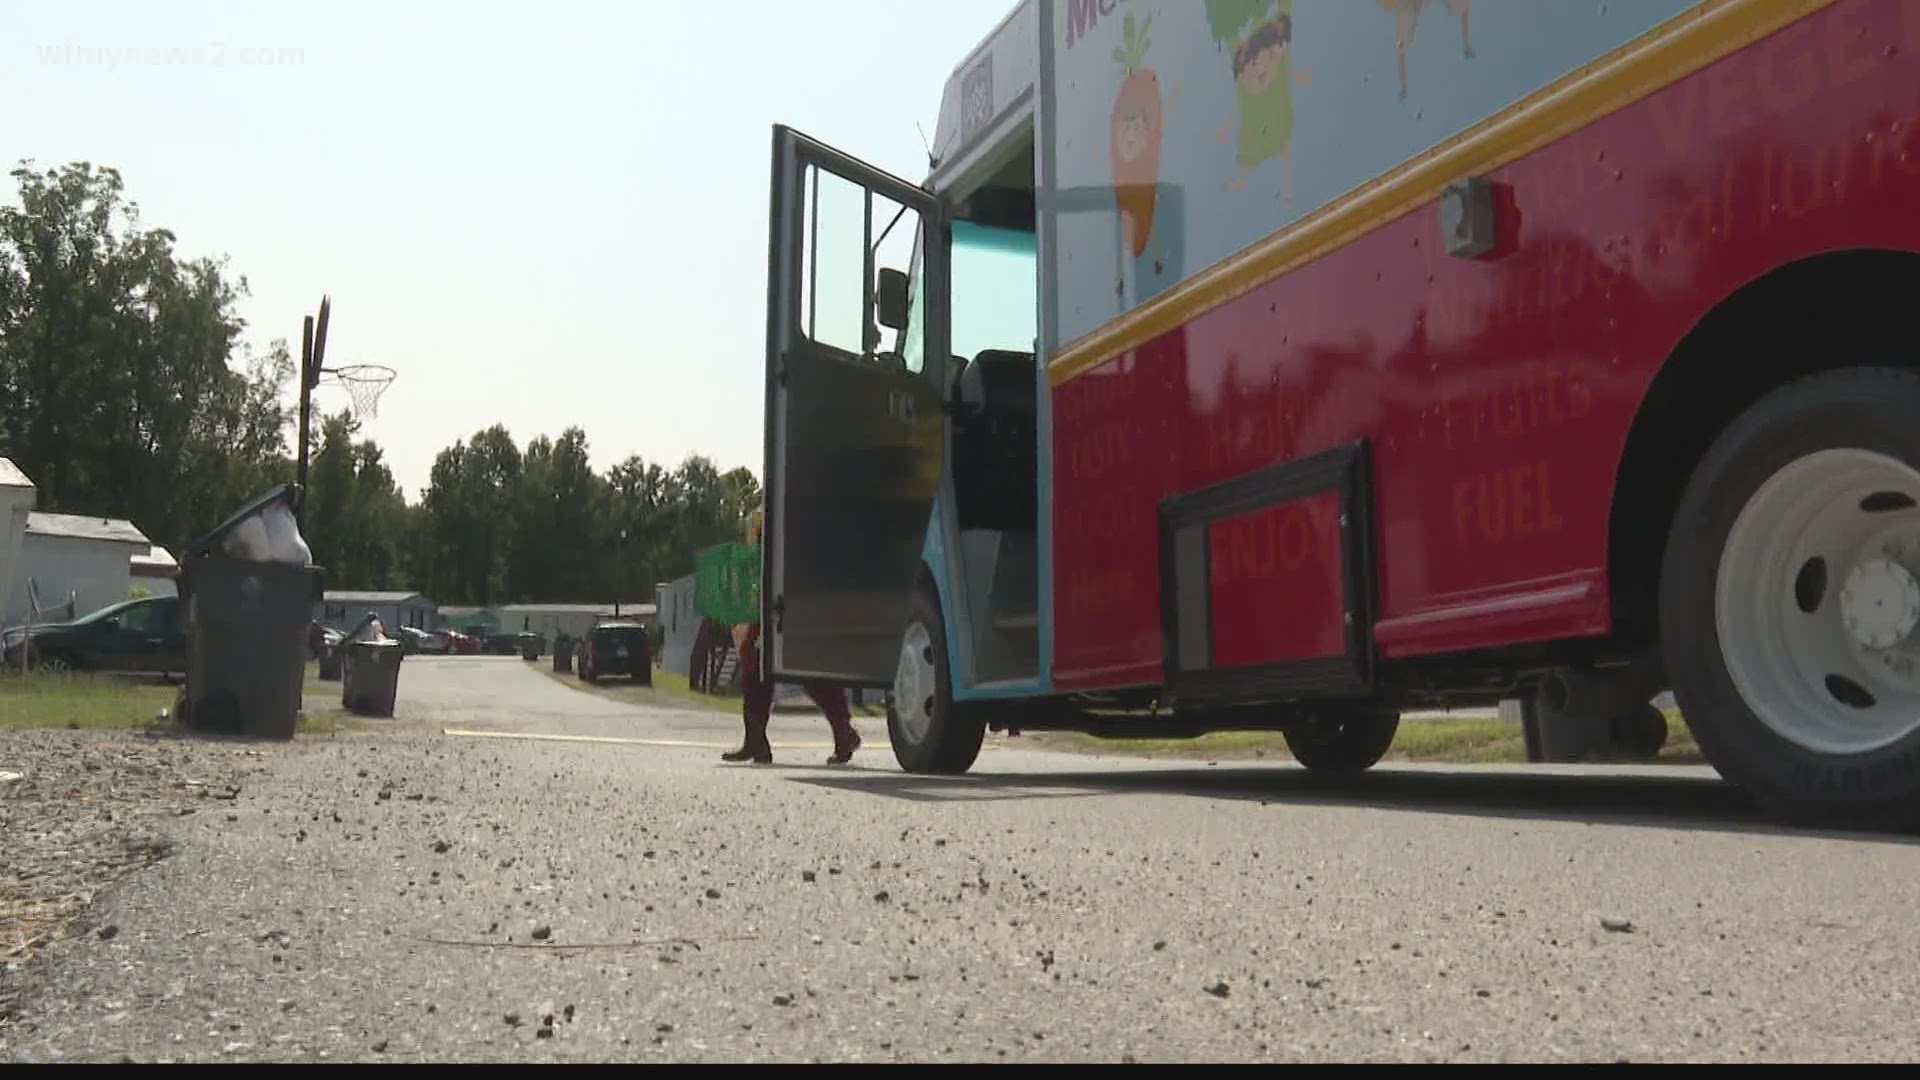 Alamance-Burlington School System debuts its food truck designed to donate meals to students.